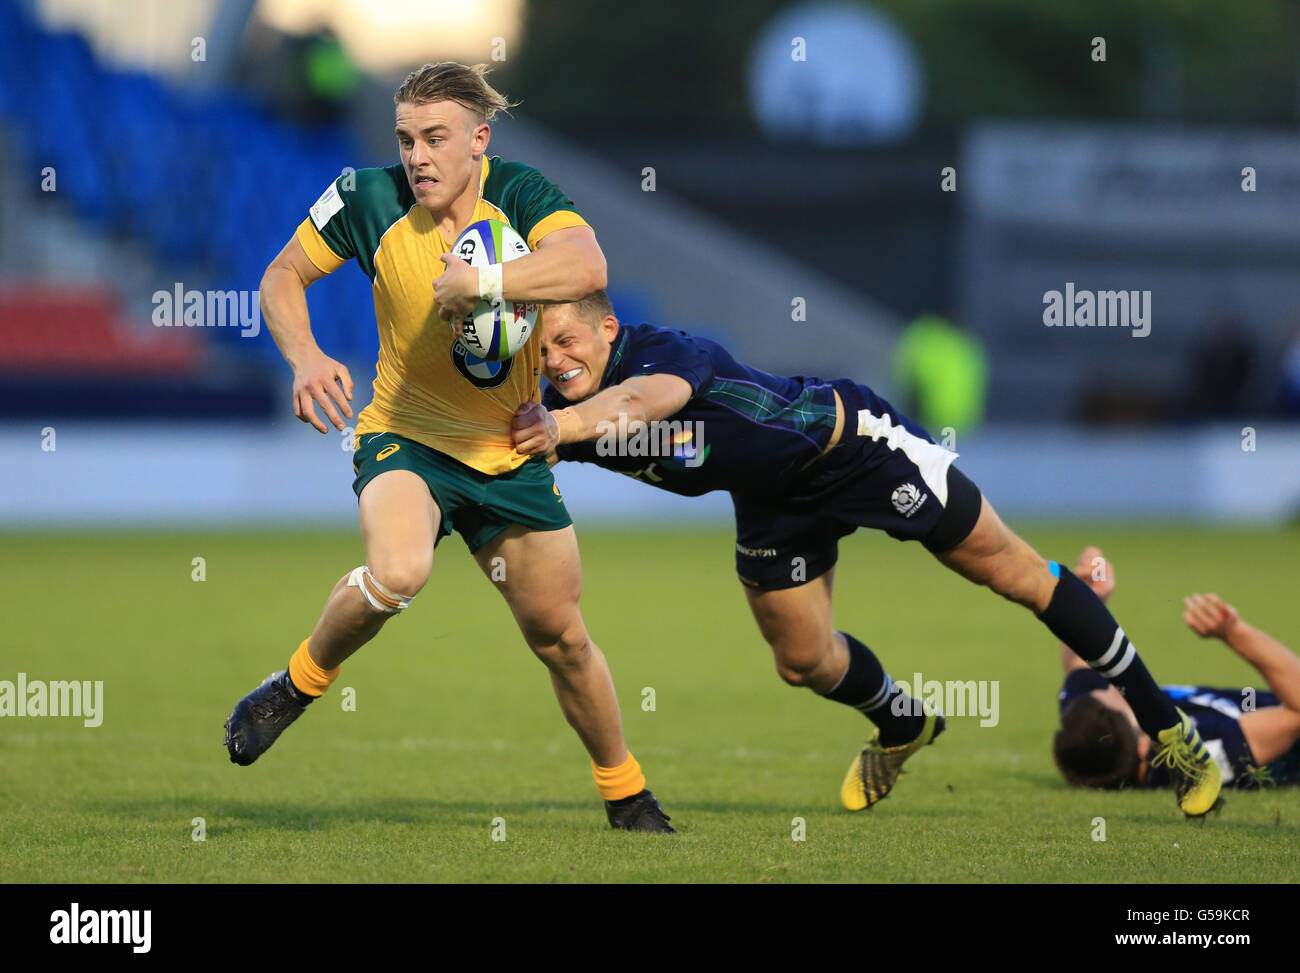 Australia's Jordan Jackson-Hope (left) evades the tackle of Scotland's Tom  Galbraith to score his sides final try of the game during the Under 20's  Rugby Union World Cup, 5th Place Semi Final